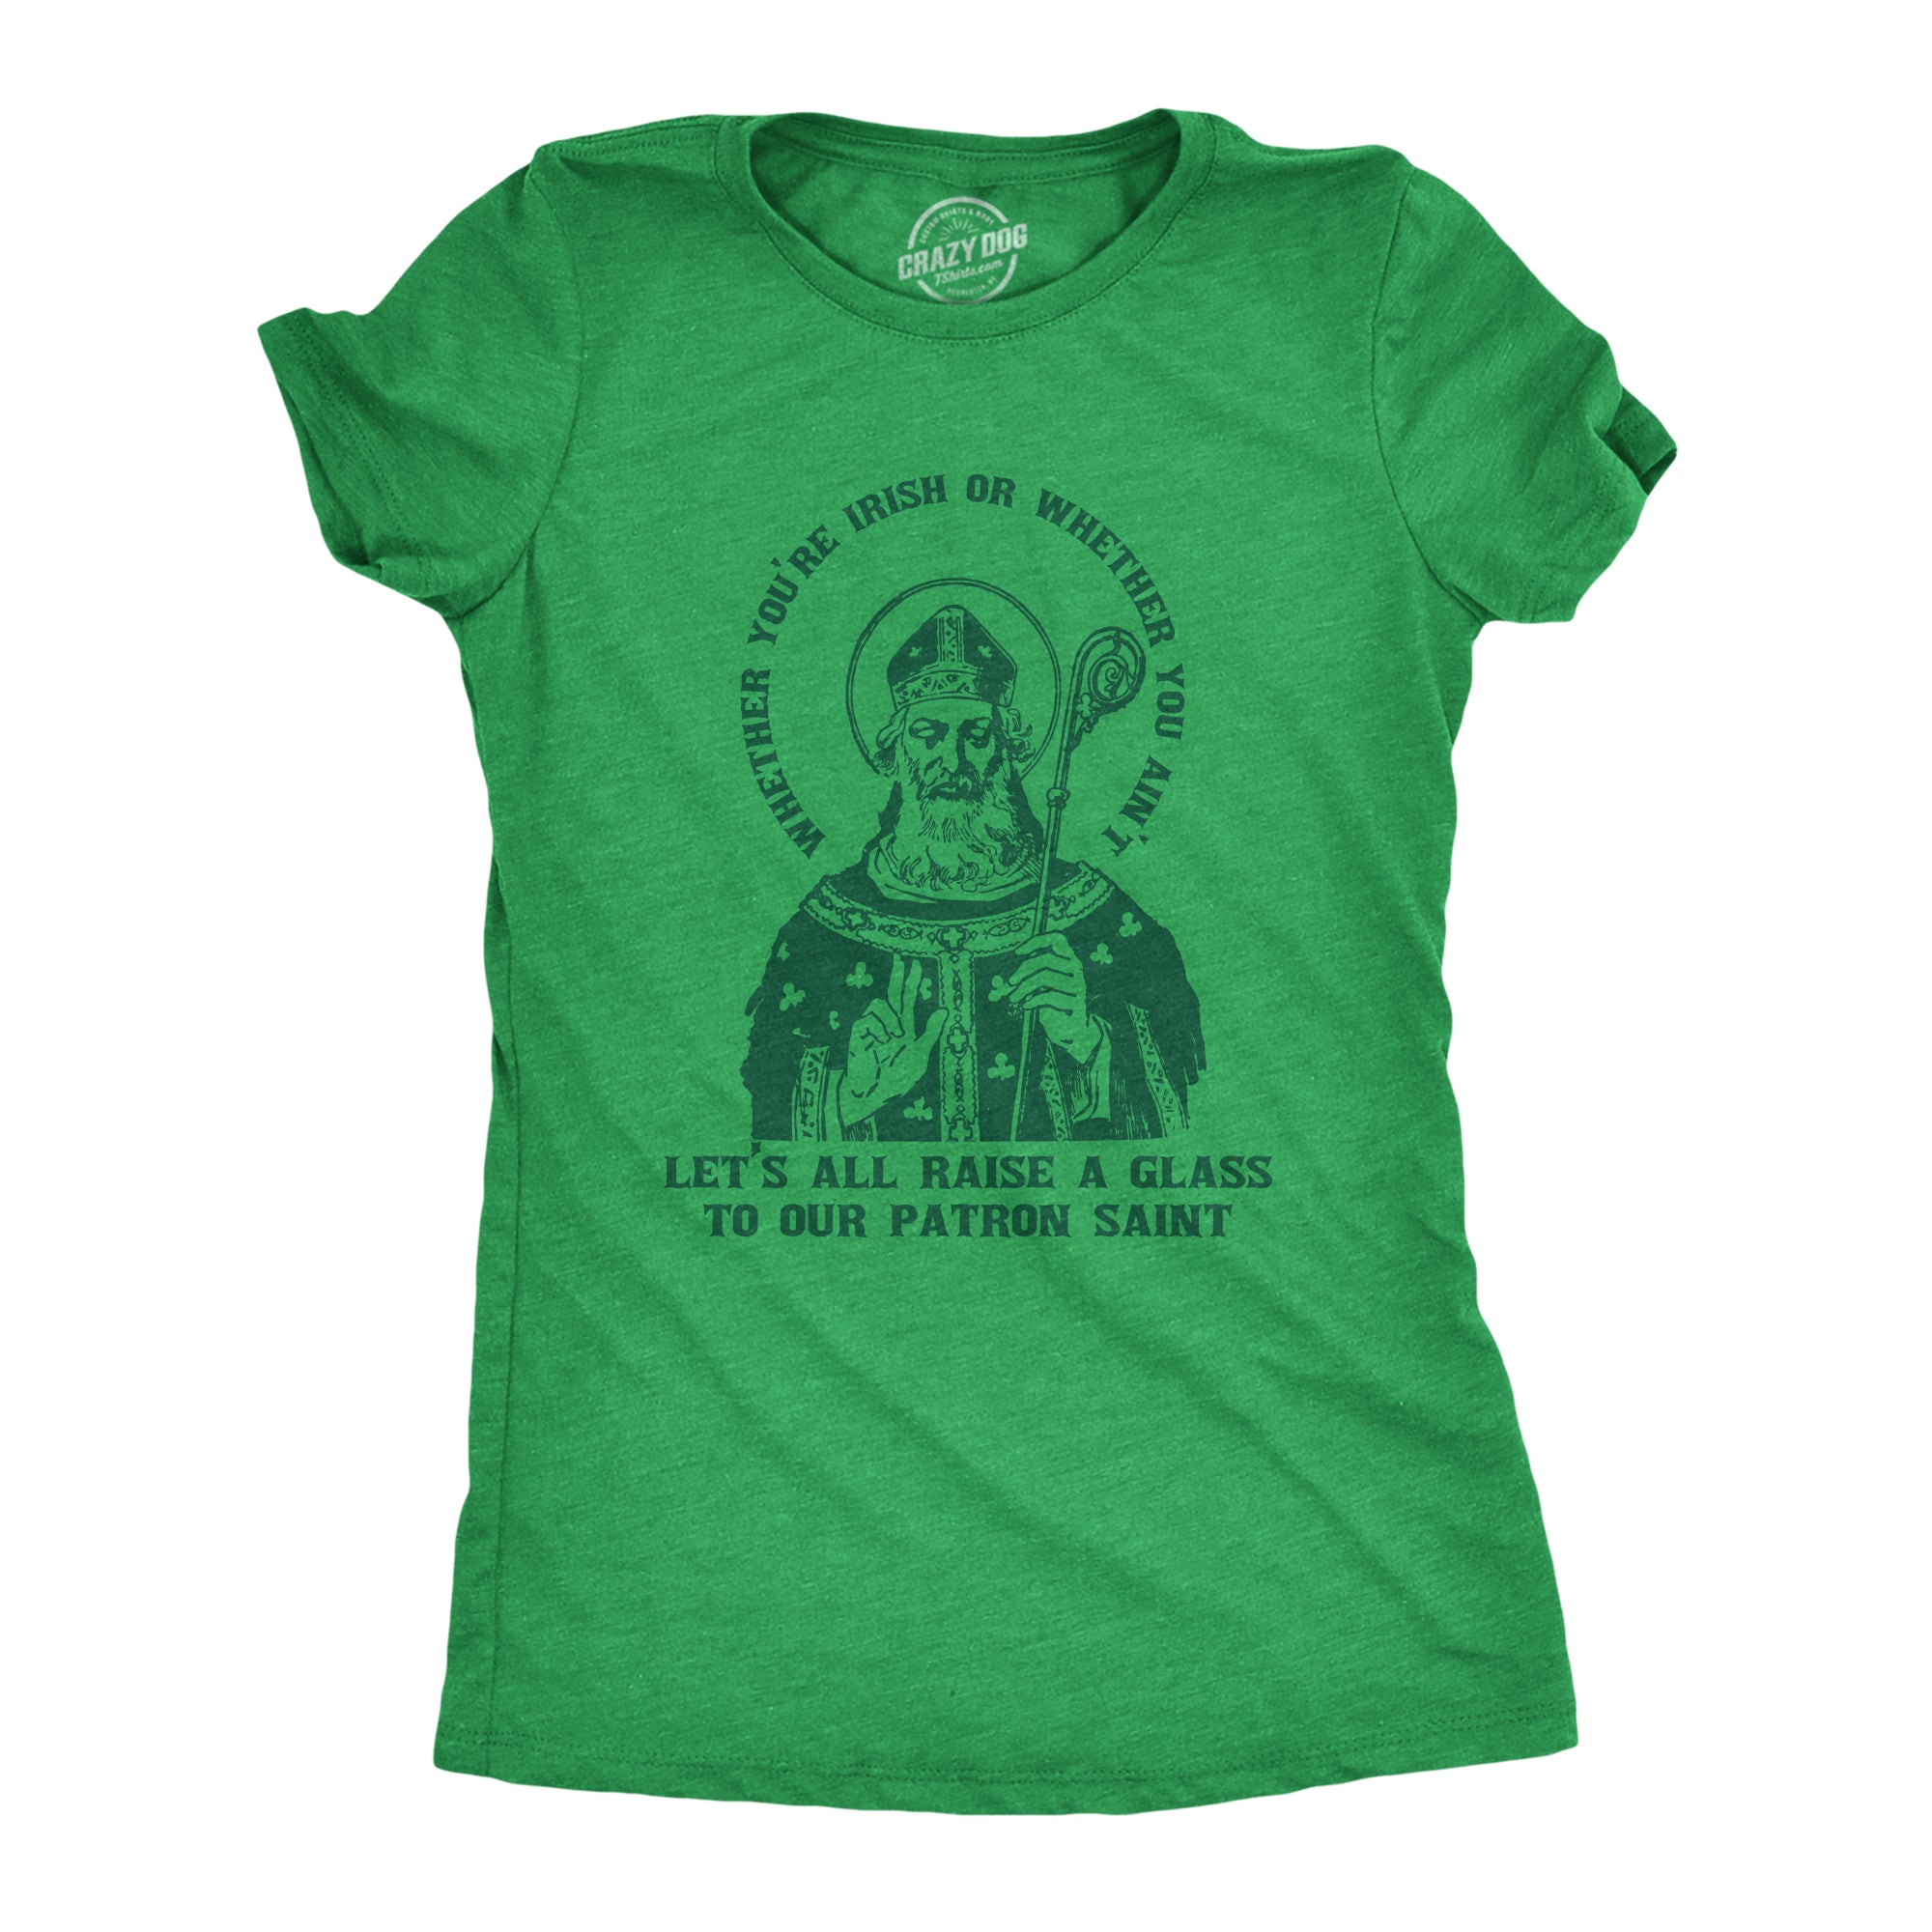 Funny Heather Green Let's All Raise A Glass To Our Patron Saint Womens T Shirt Nerdy Saint Patrick's Day Drinking Tee